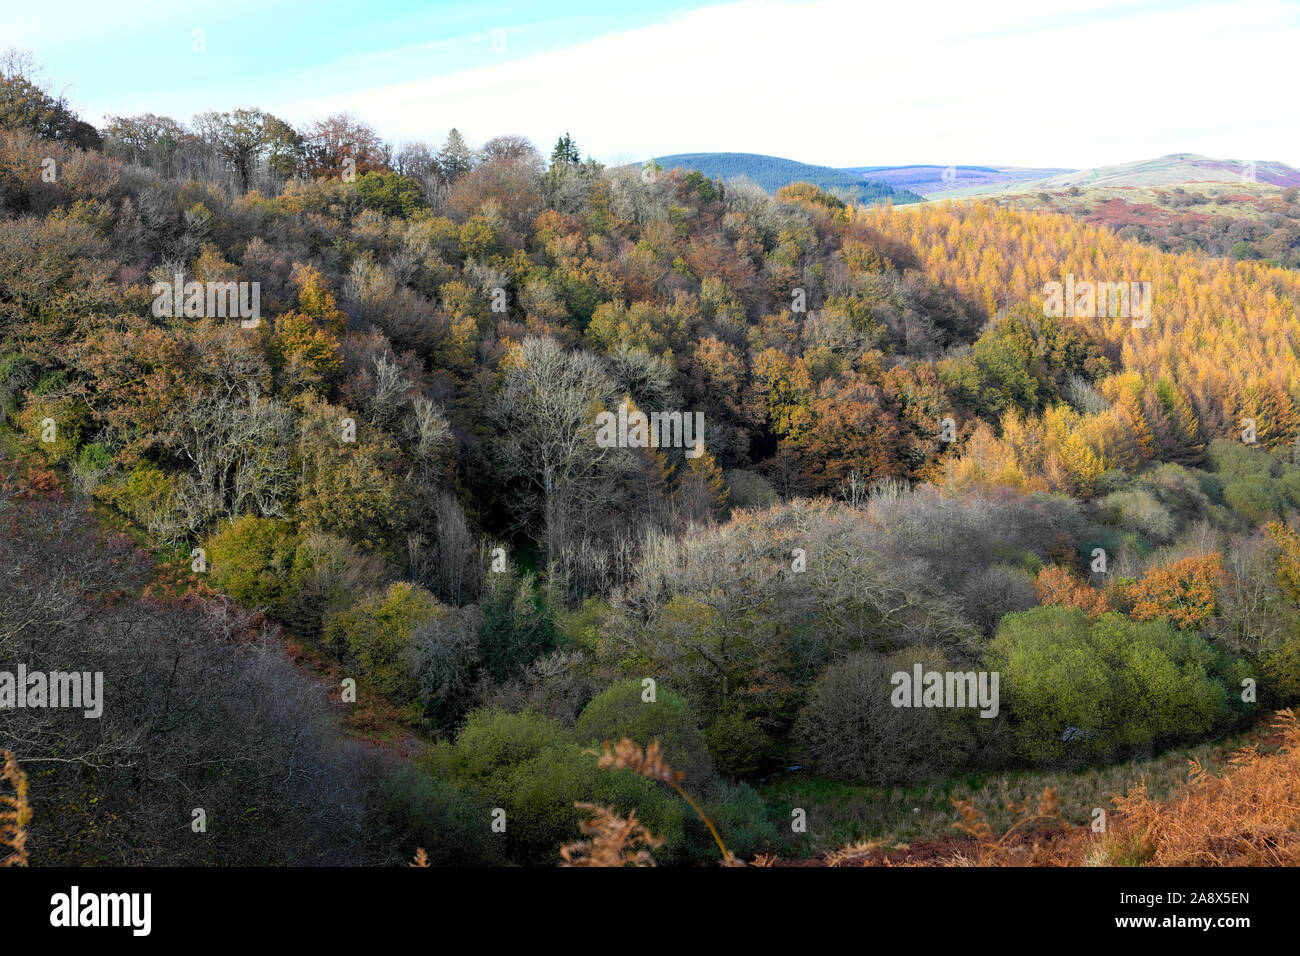 Deciduous oak natural forest woodland wooded wood landscape Larch trees tree plantation countryside in autumn  Carmarthenshire Wales UK  KATHY DEWITT Stock Photo